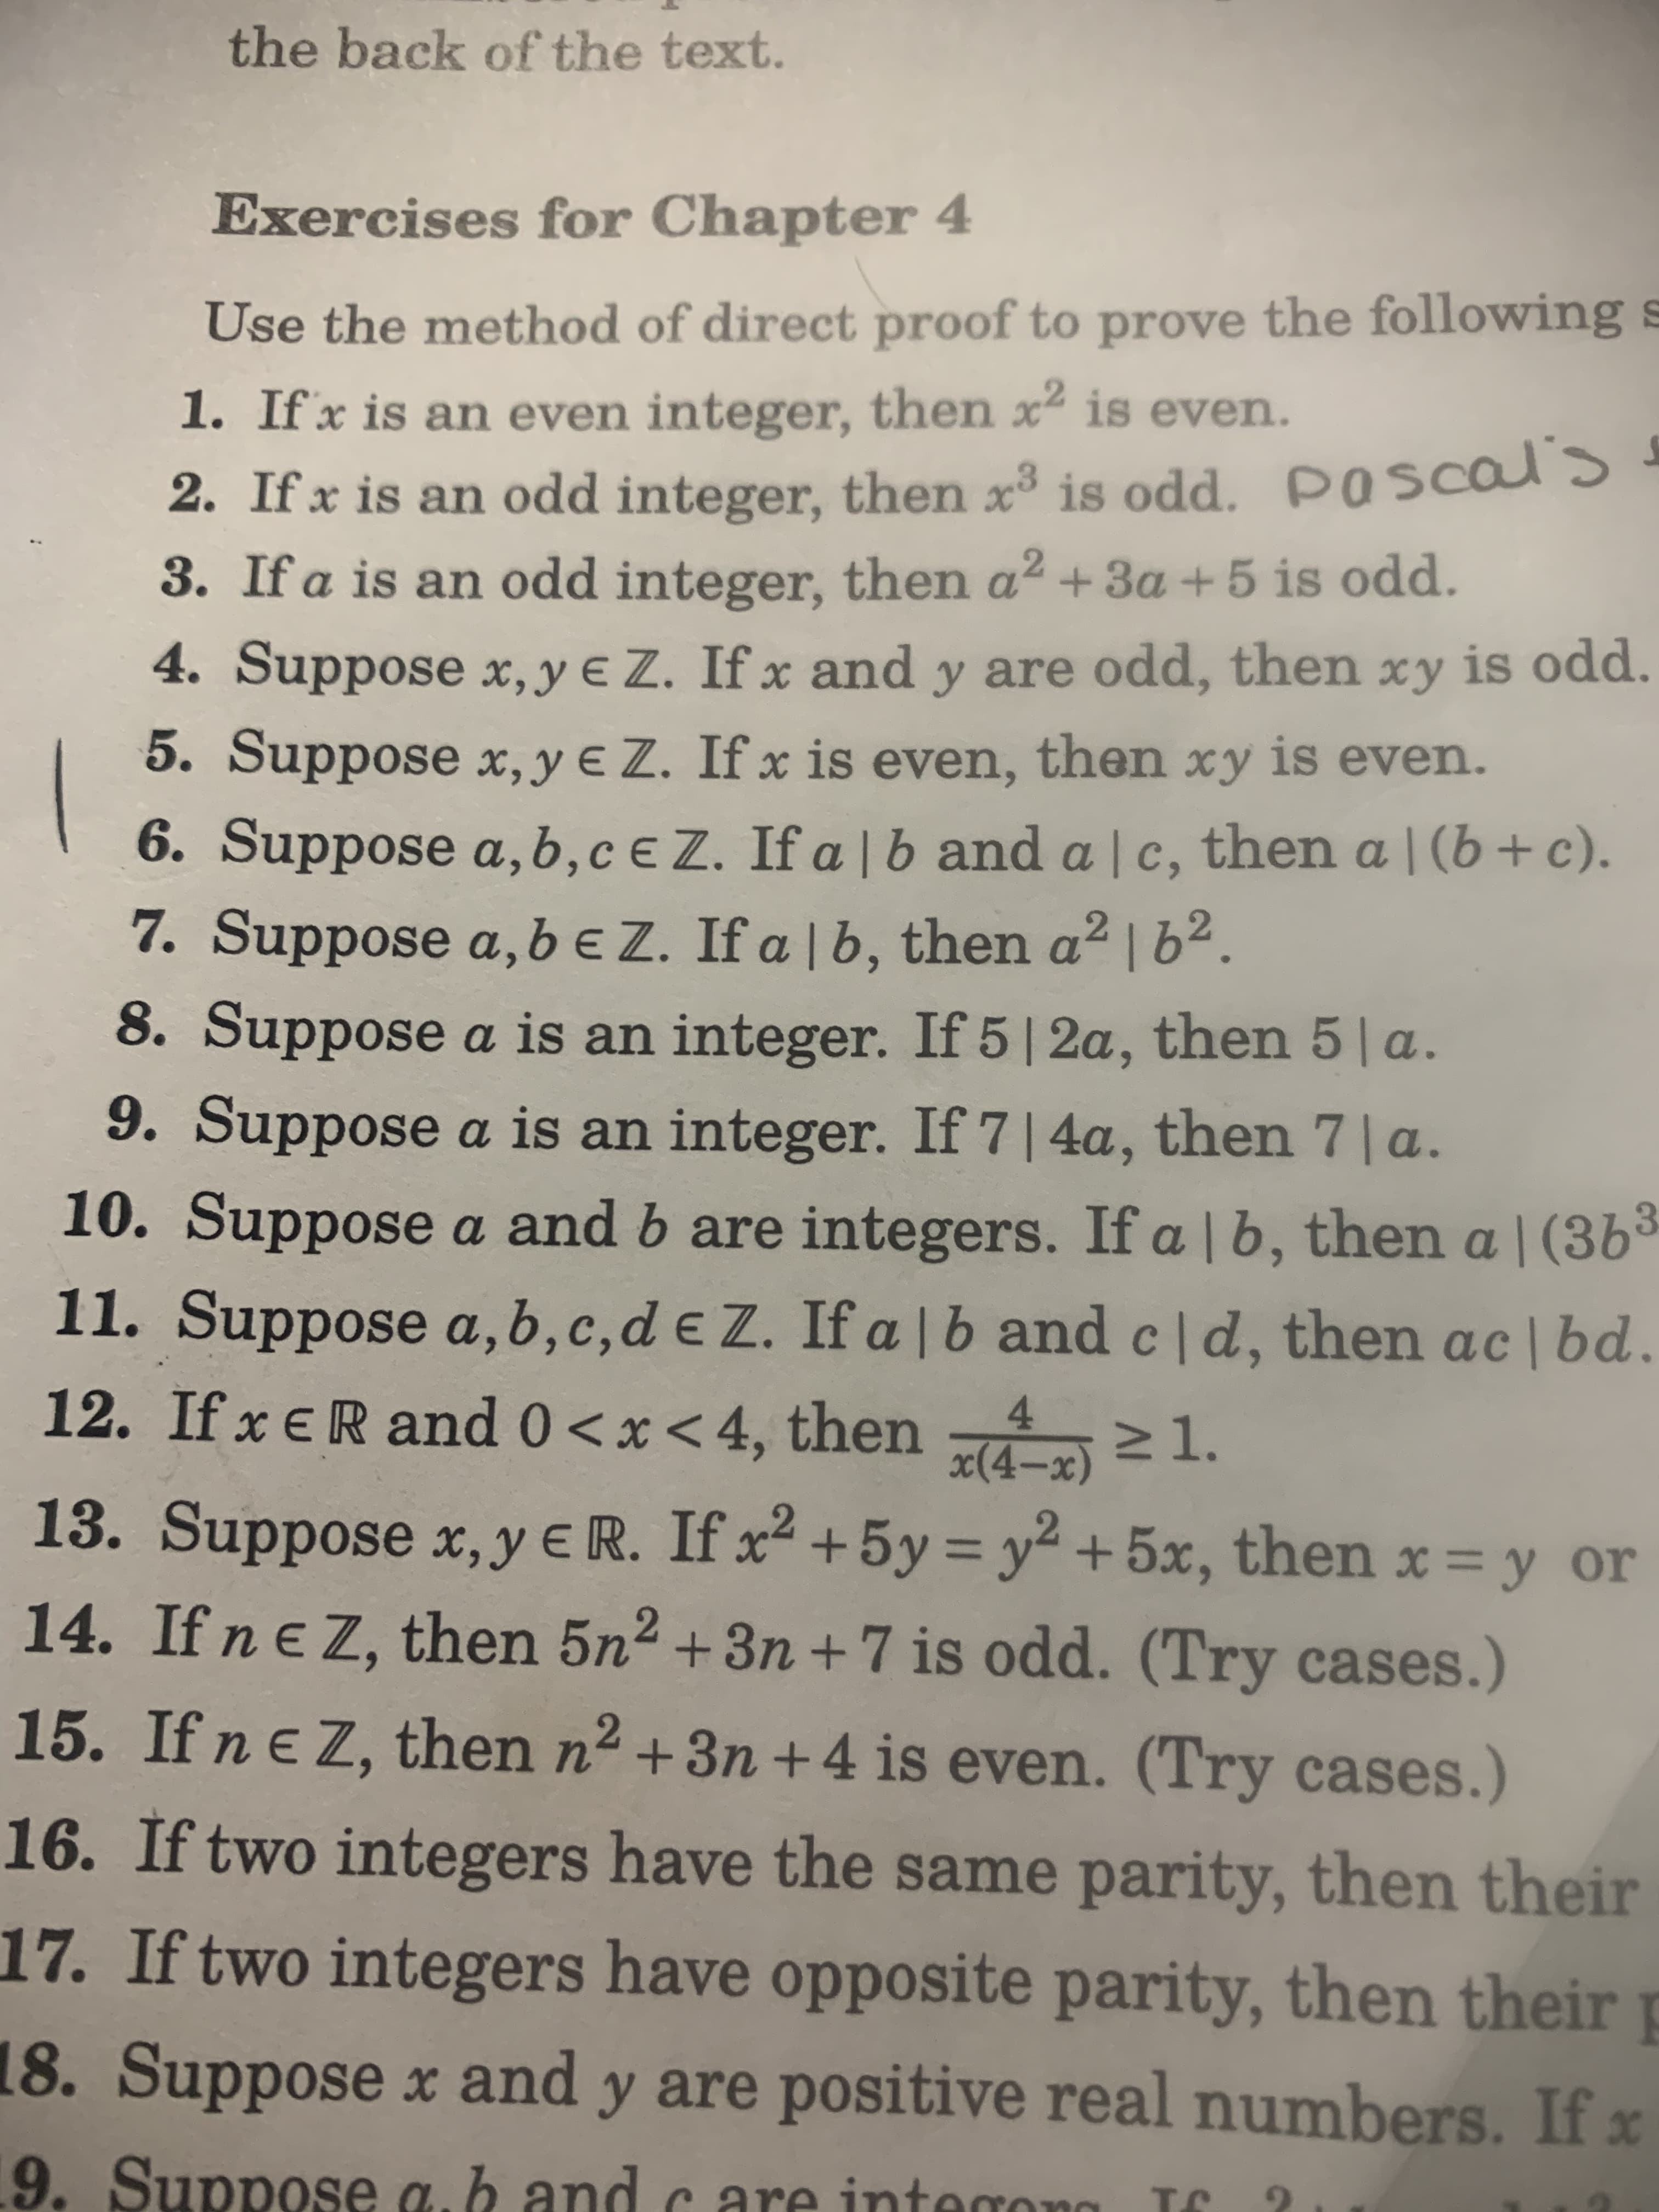 8. Suppose a is an integer. If 5| 2a, then 5|a.
